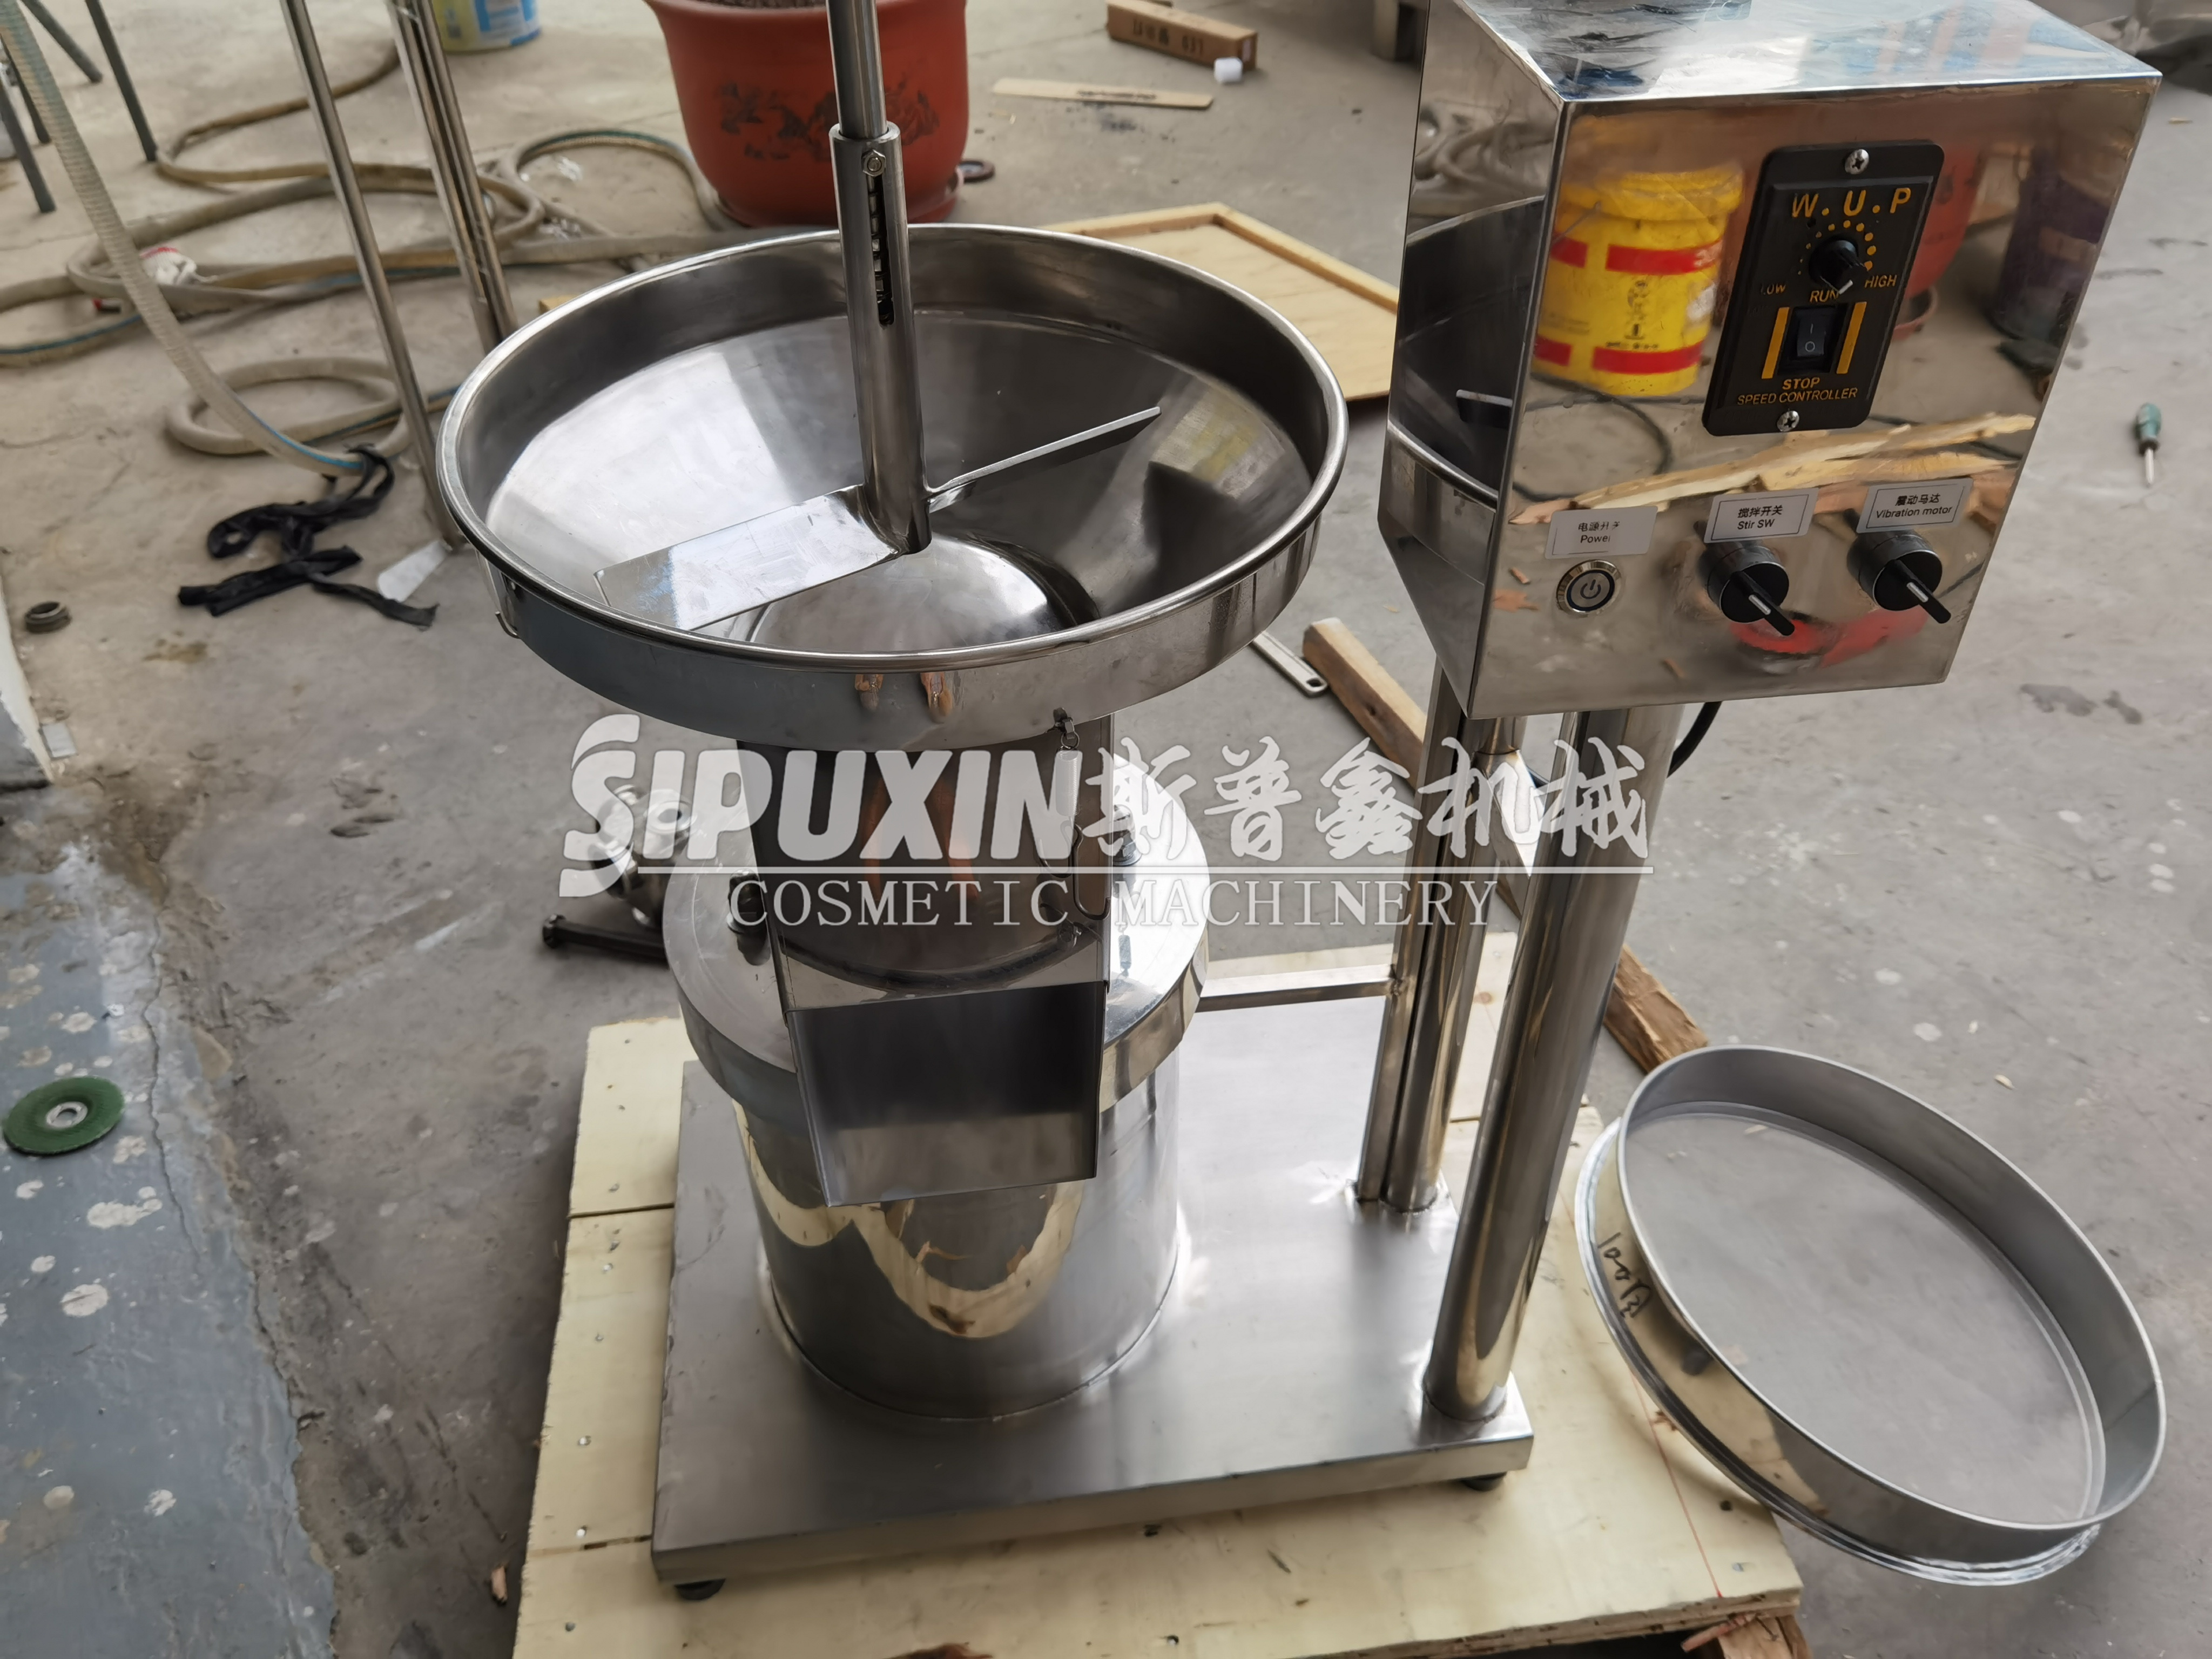 Sipuxin Foundation Sieve Machine for Cosmetic Powder